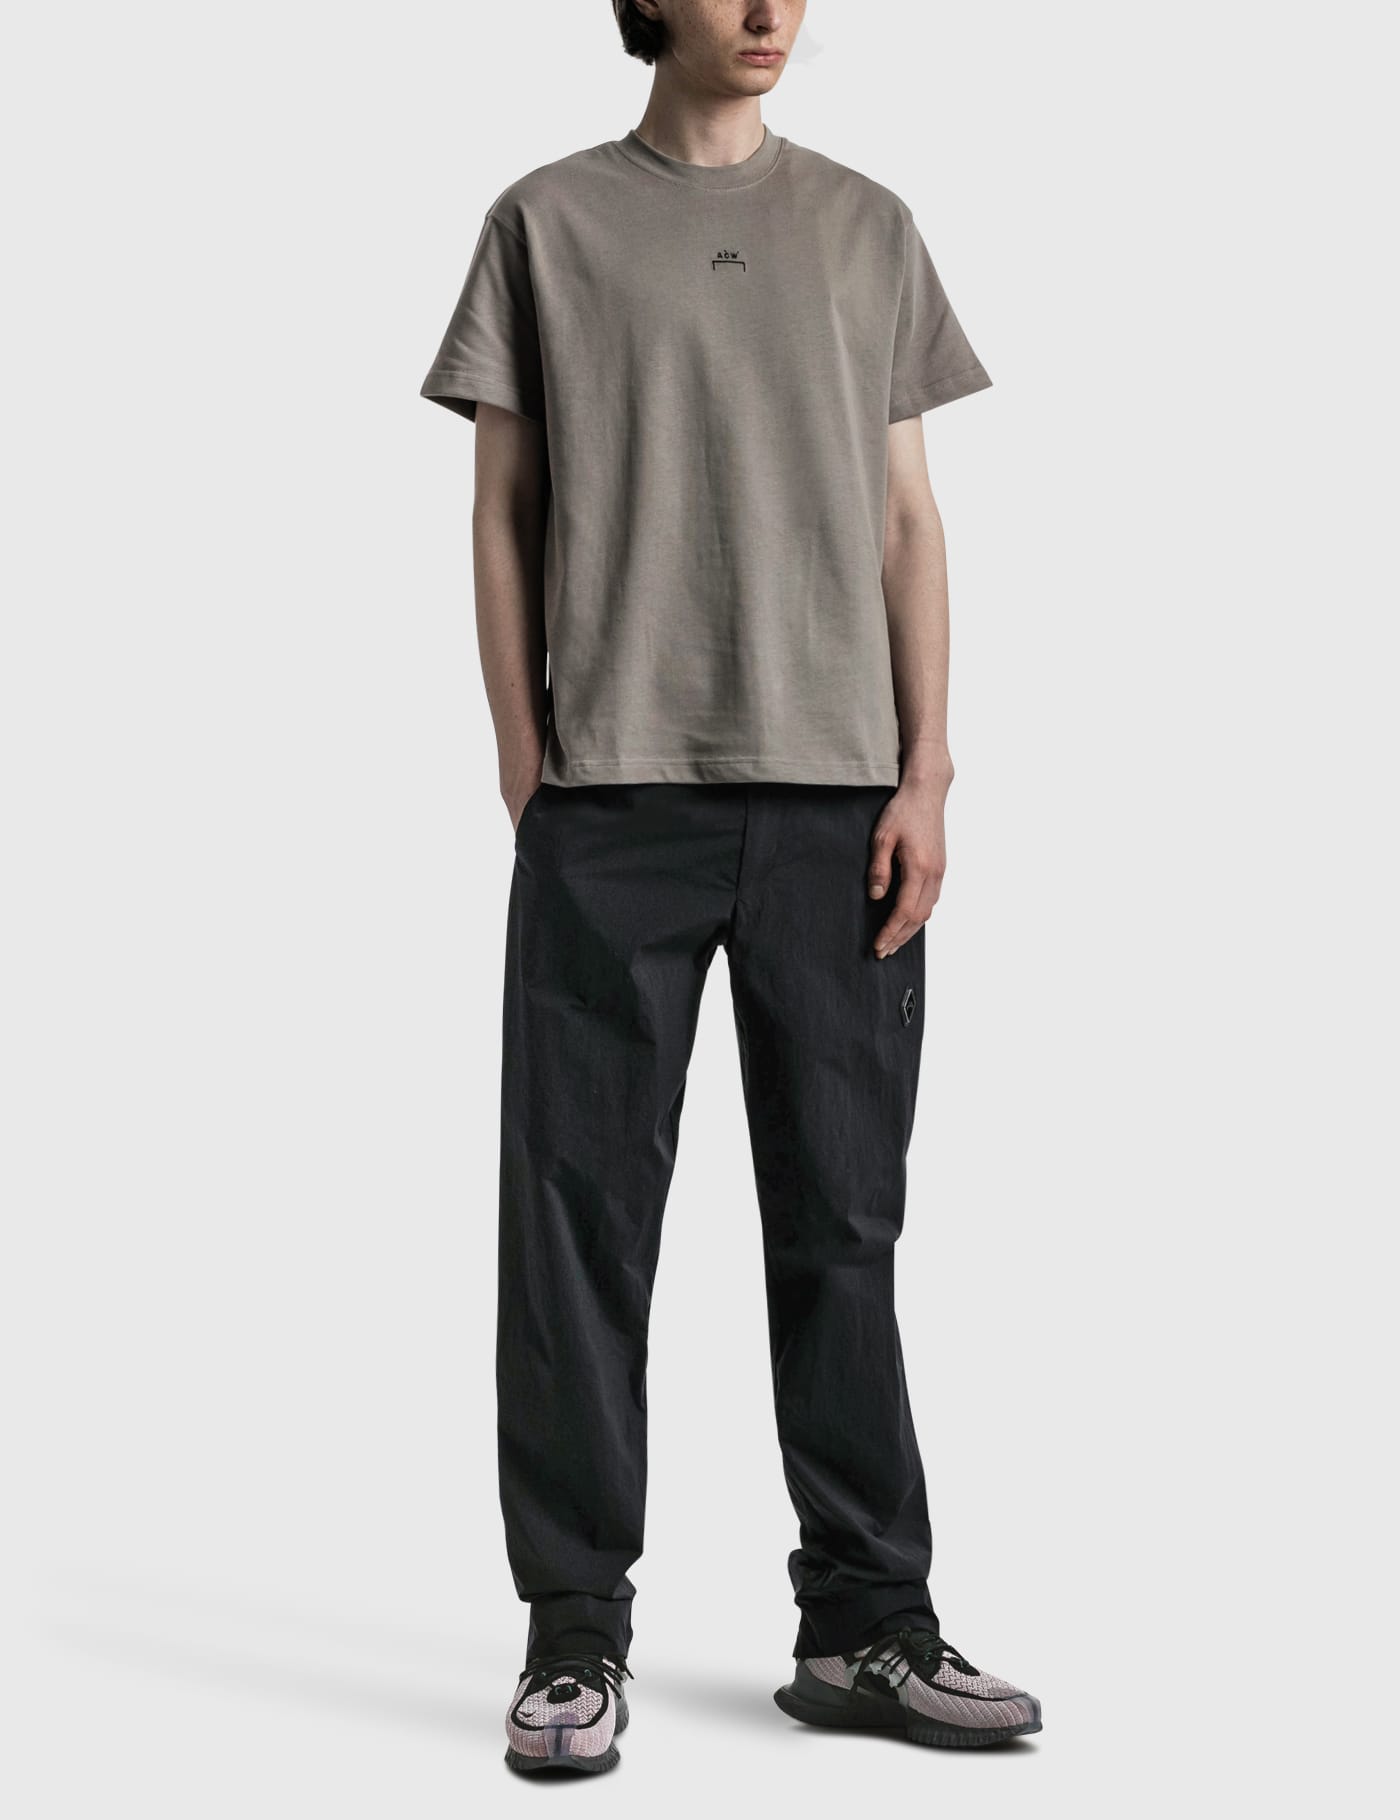 A-COLD-WALL* - Stealth Nylon Pants | HBX - Globally Curated